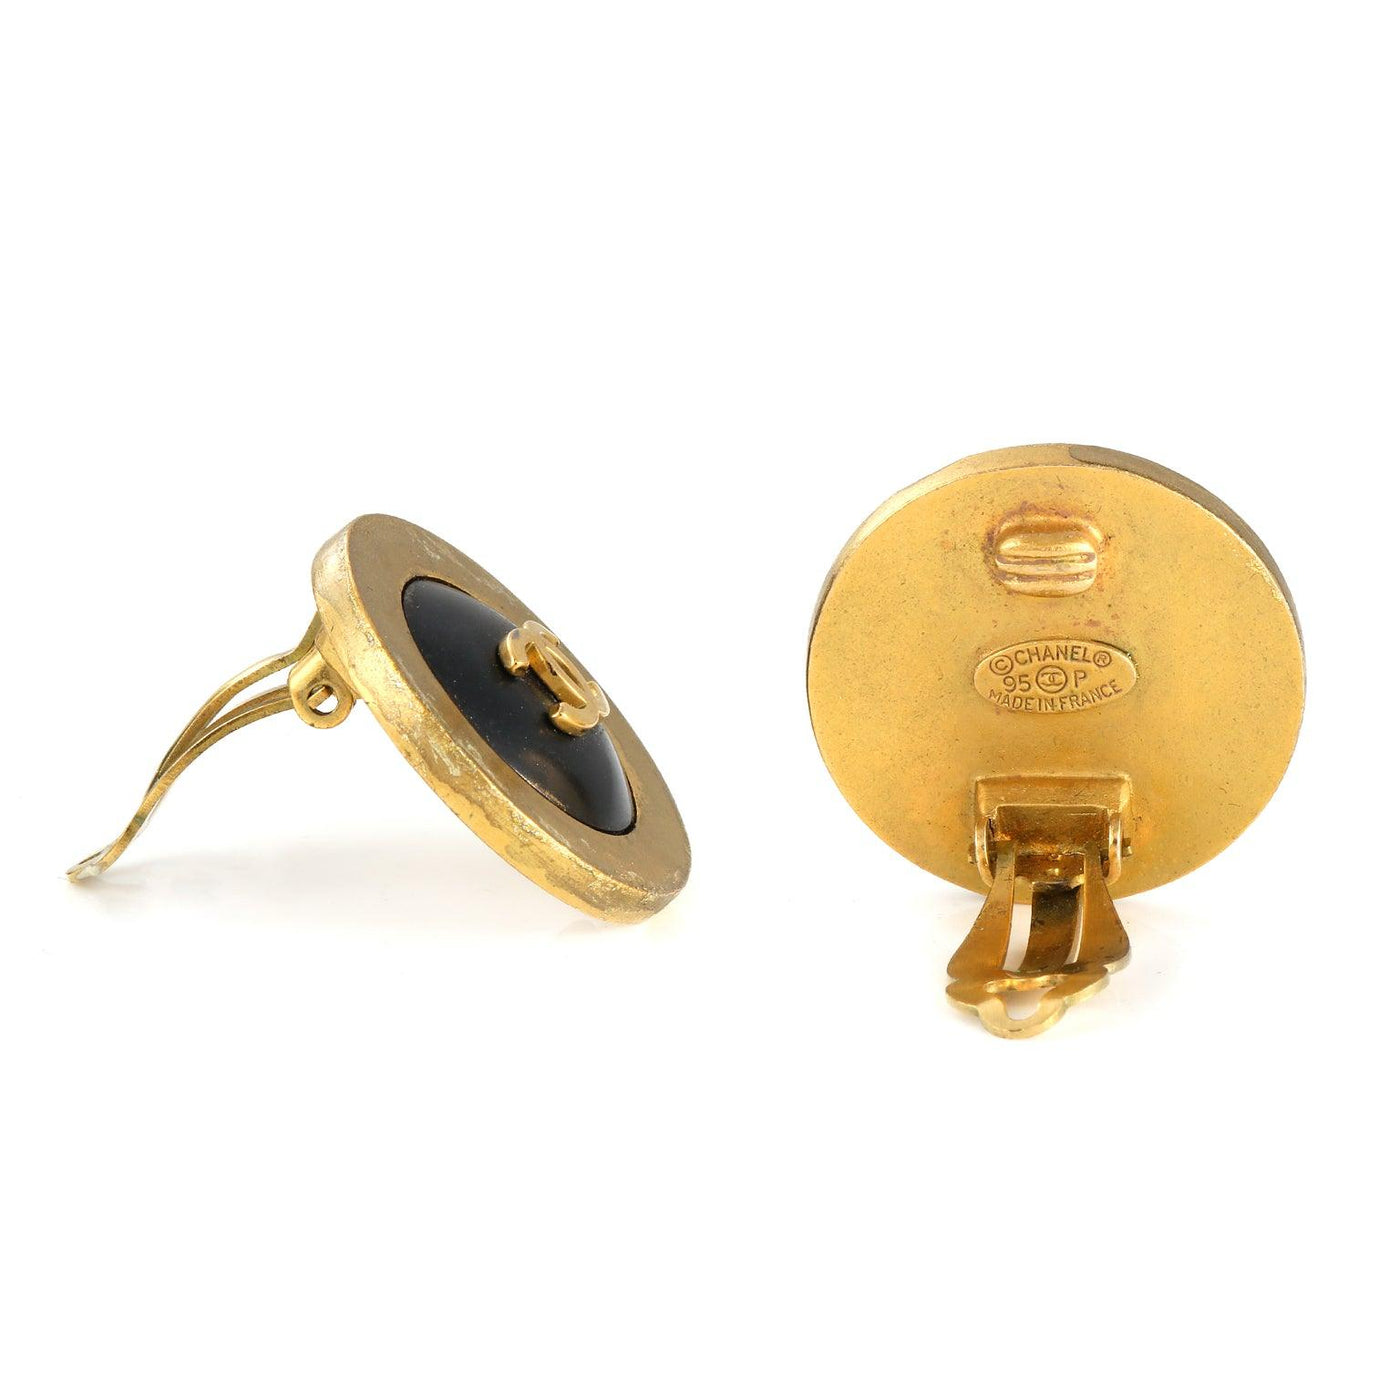 Chanel Black CC Button Earrings with Gold Surround - Only Authentics